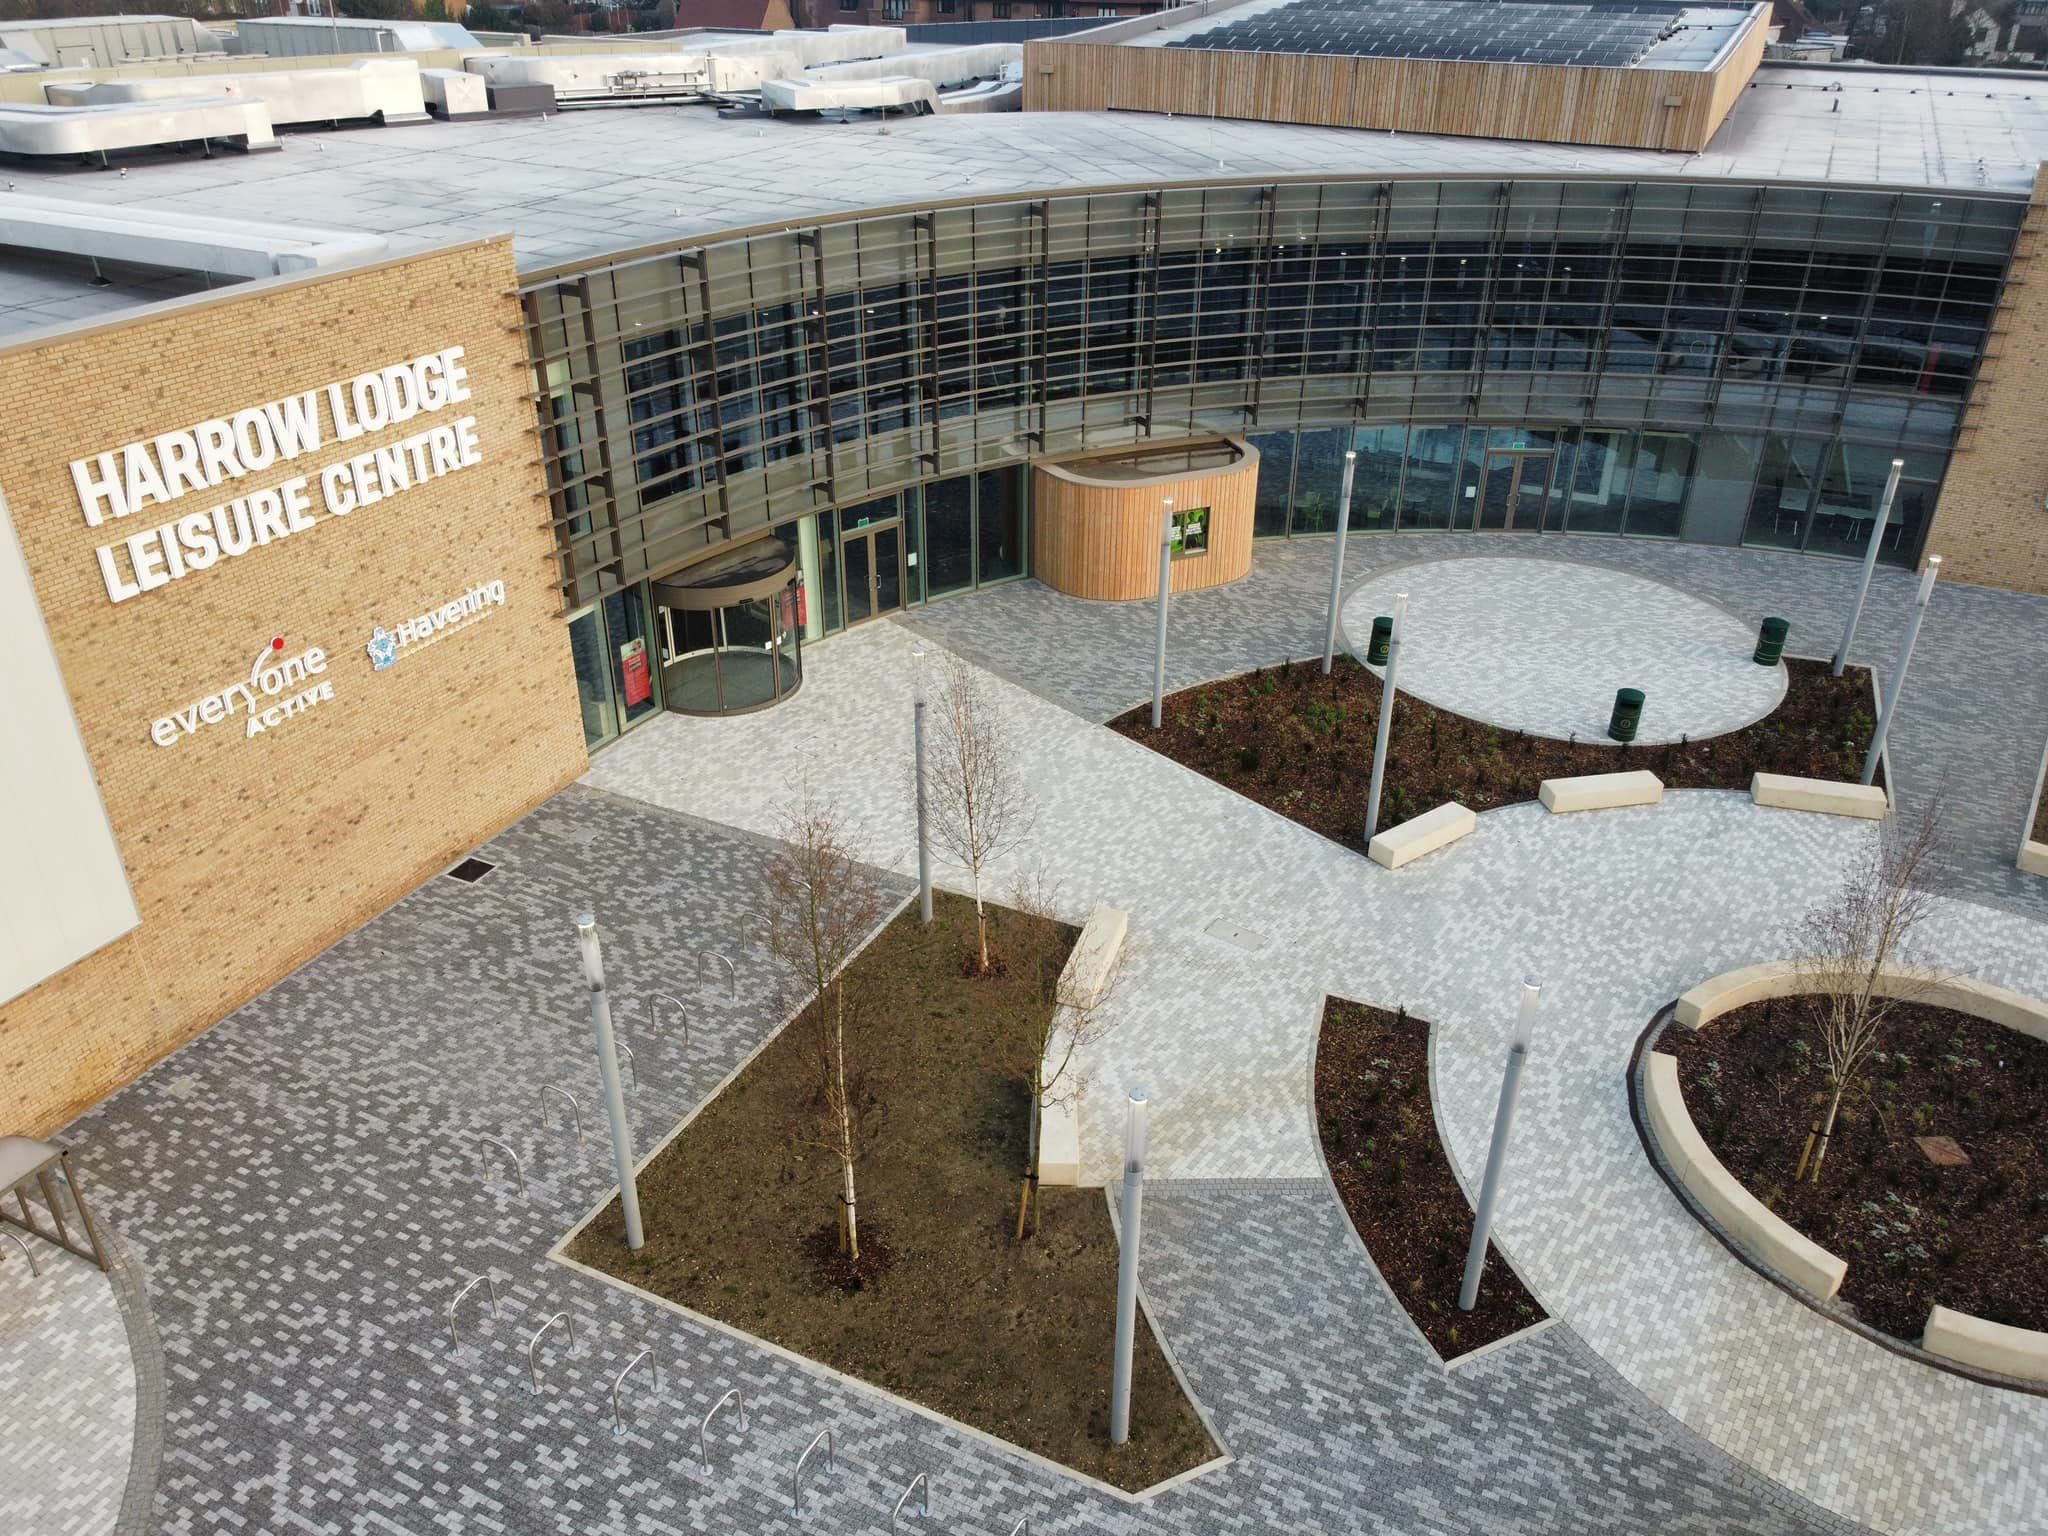 birdseye view of leisure centre courtyard and concrete seating